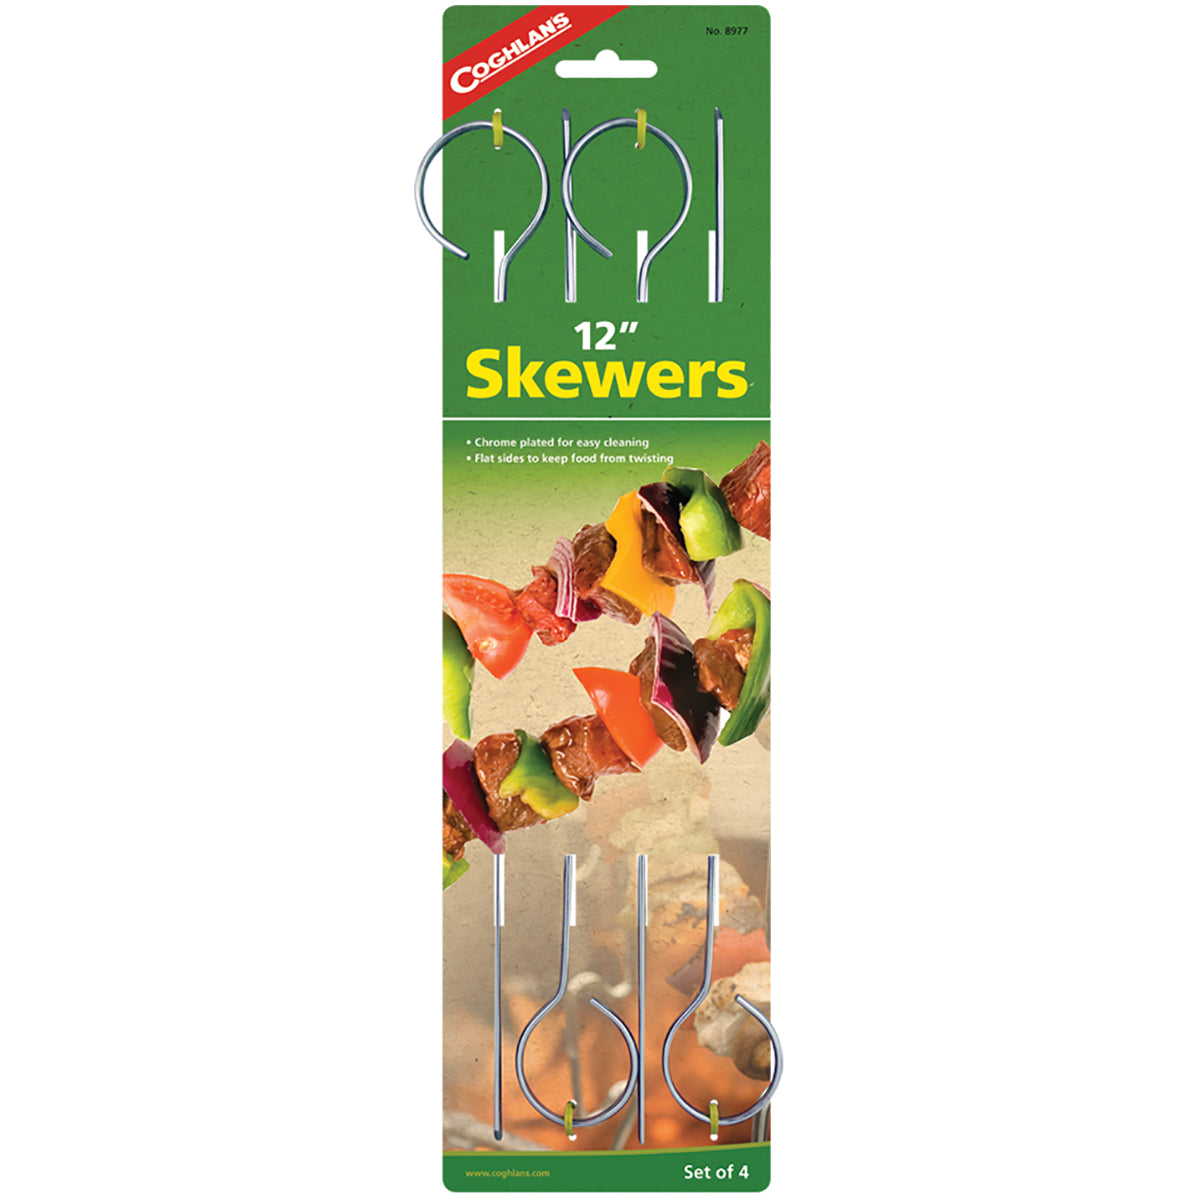 Coghlan's 12" Chrome Plated Skewers - 4-Pack Coghlan's